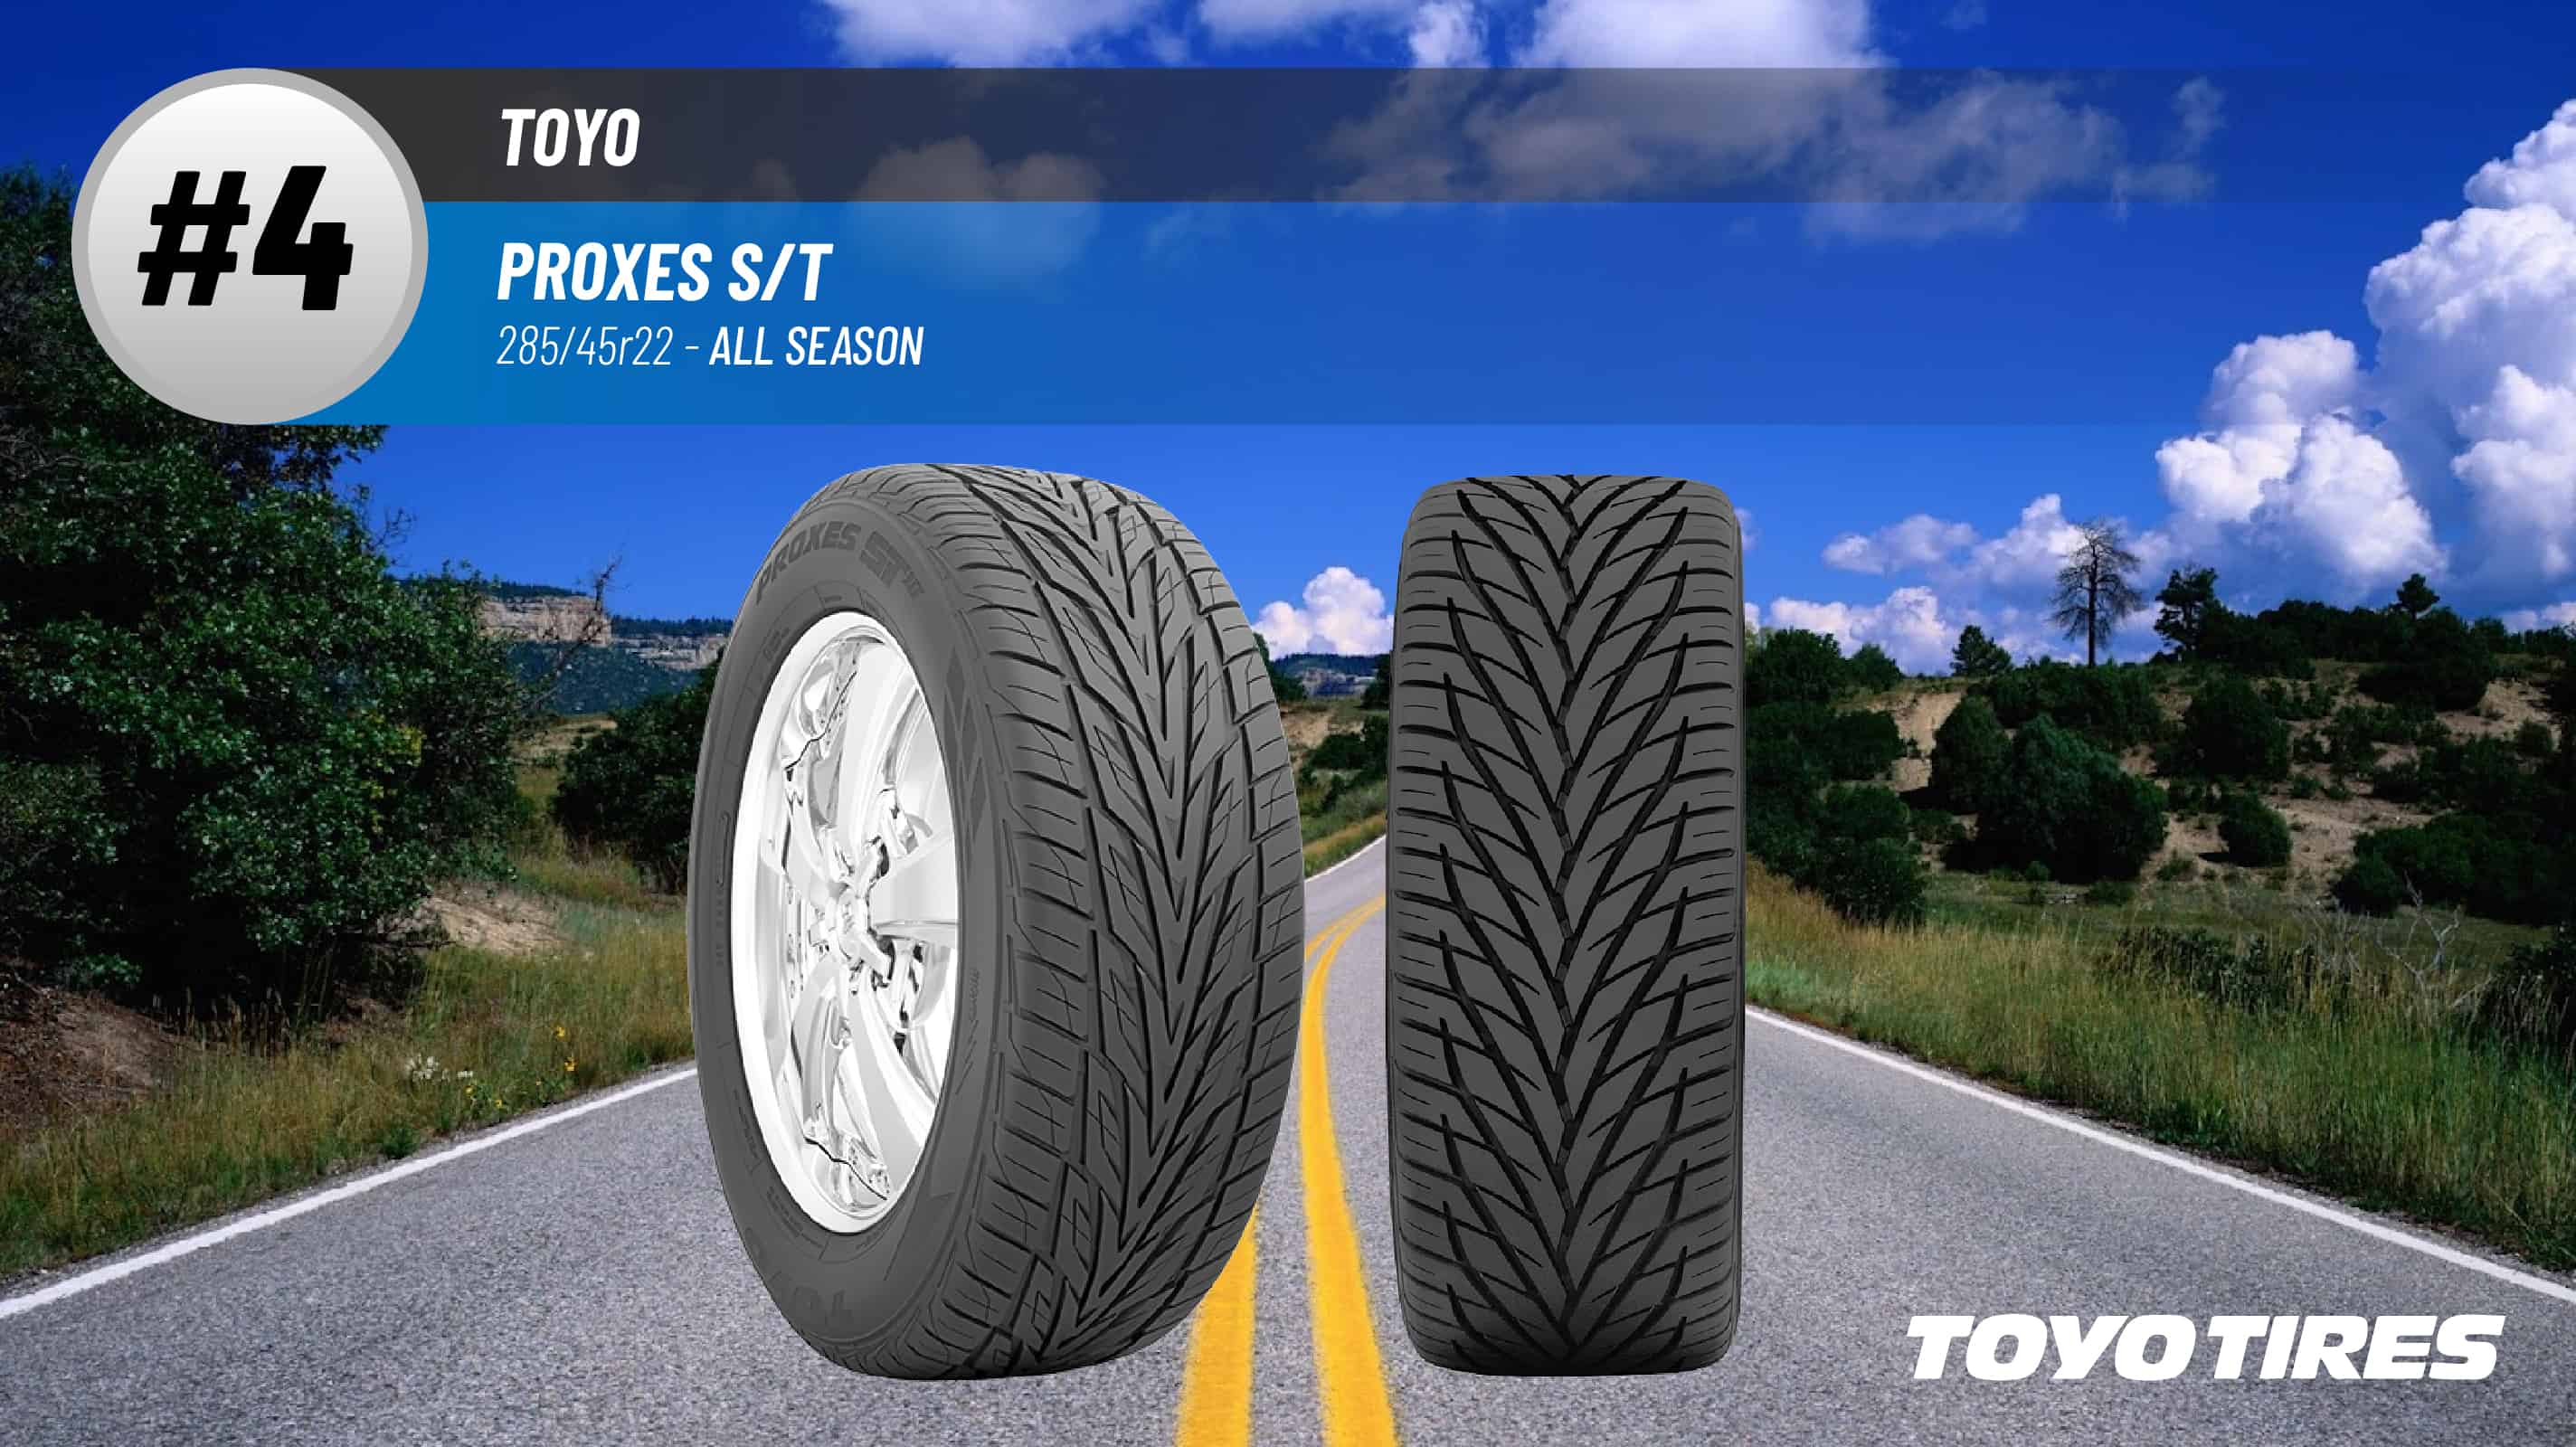 Top #4 All Season Tires: Toyo Proxes S/T – best 285/45r22